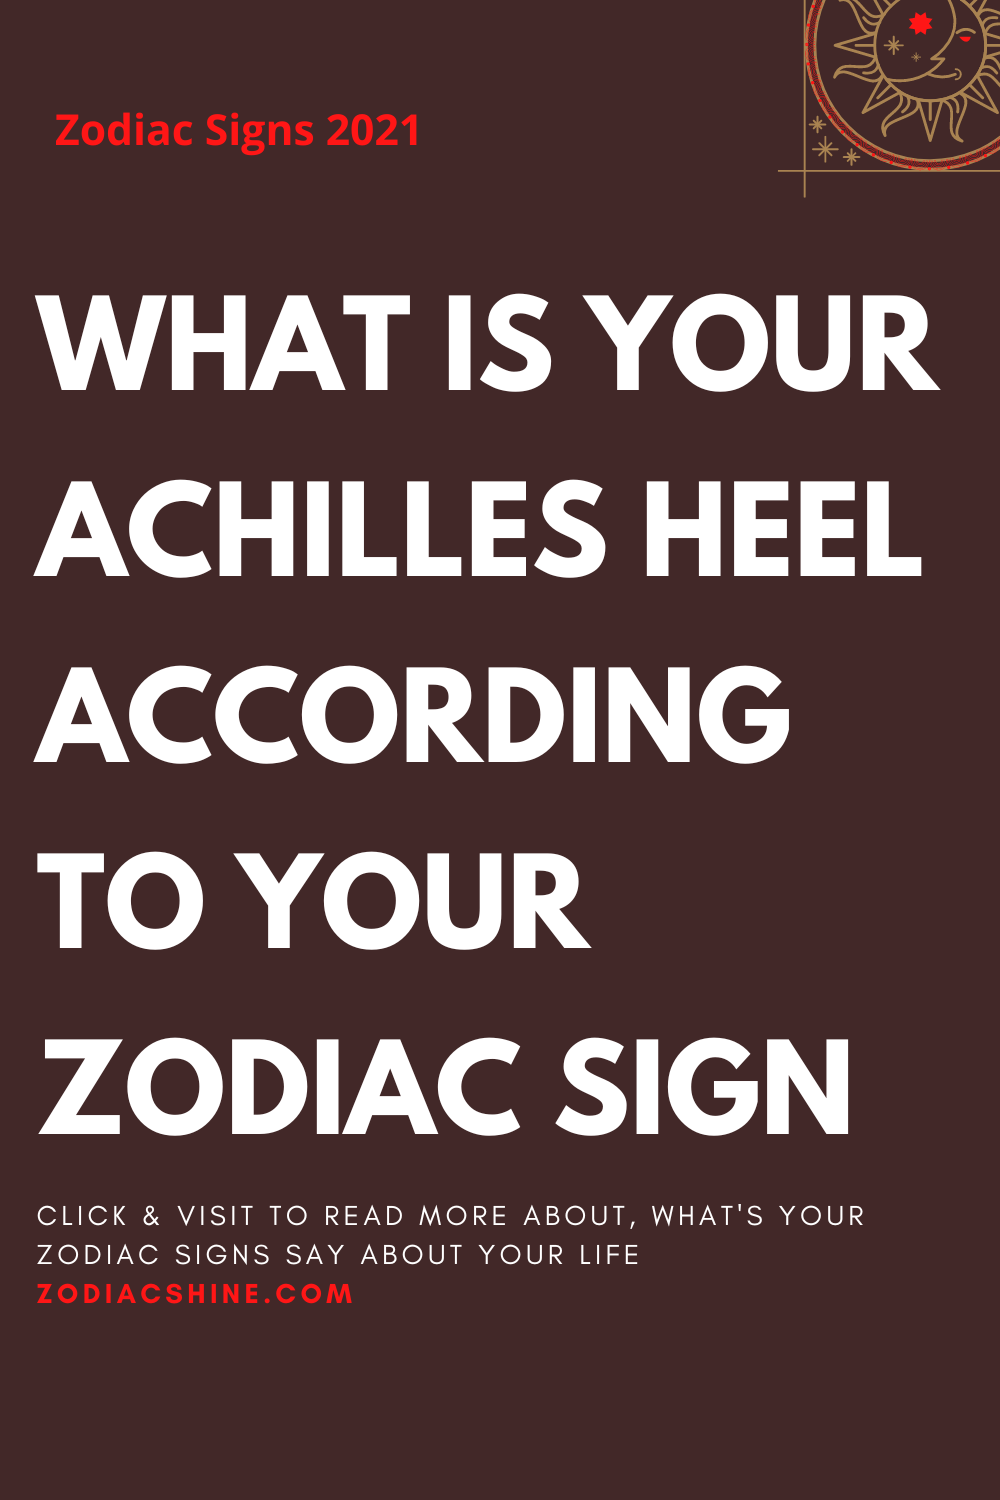 WHAT IS YOUR ACHILLES HEEL ACCORDING TO YOUR ZODIAC SIGN